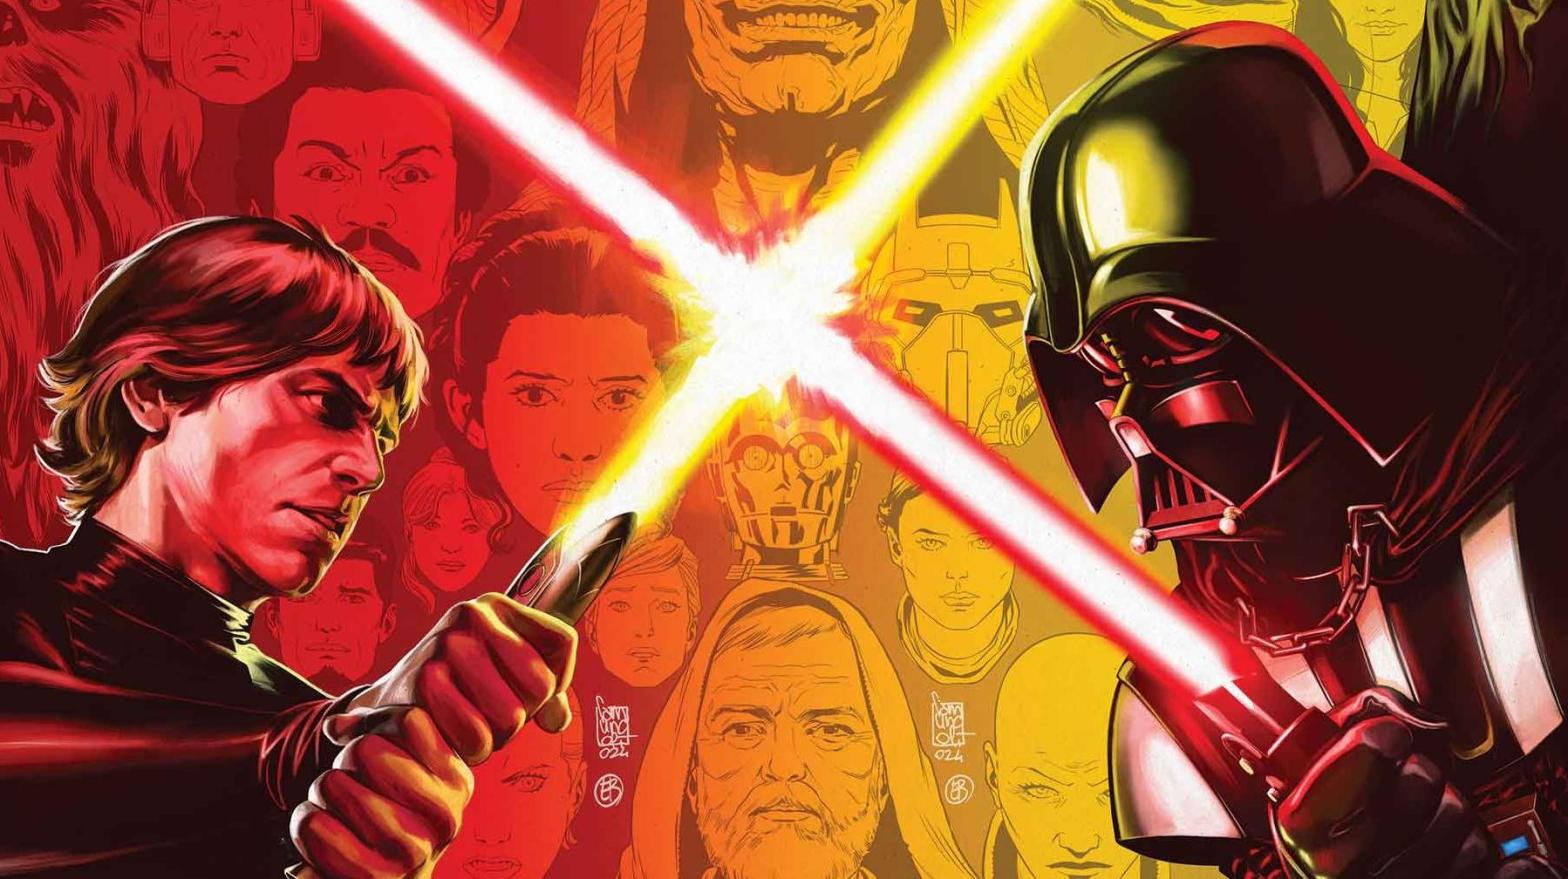 Marvel’s Star Wars Comics Are Finally Moving on From the Most Unhinged Year in Canon